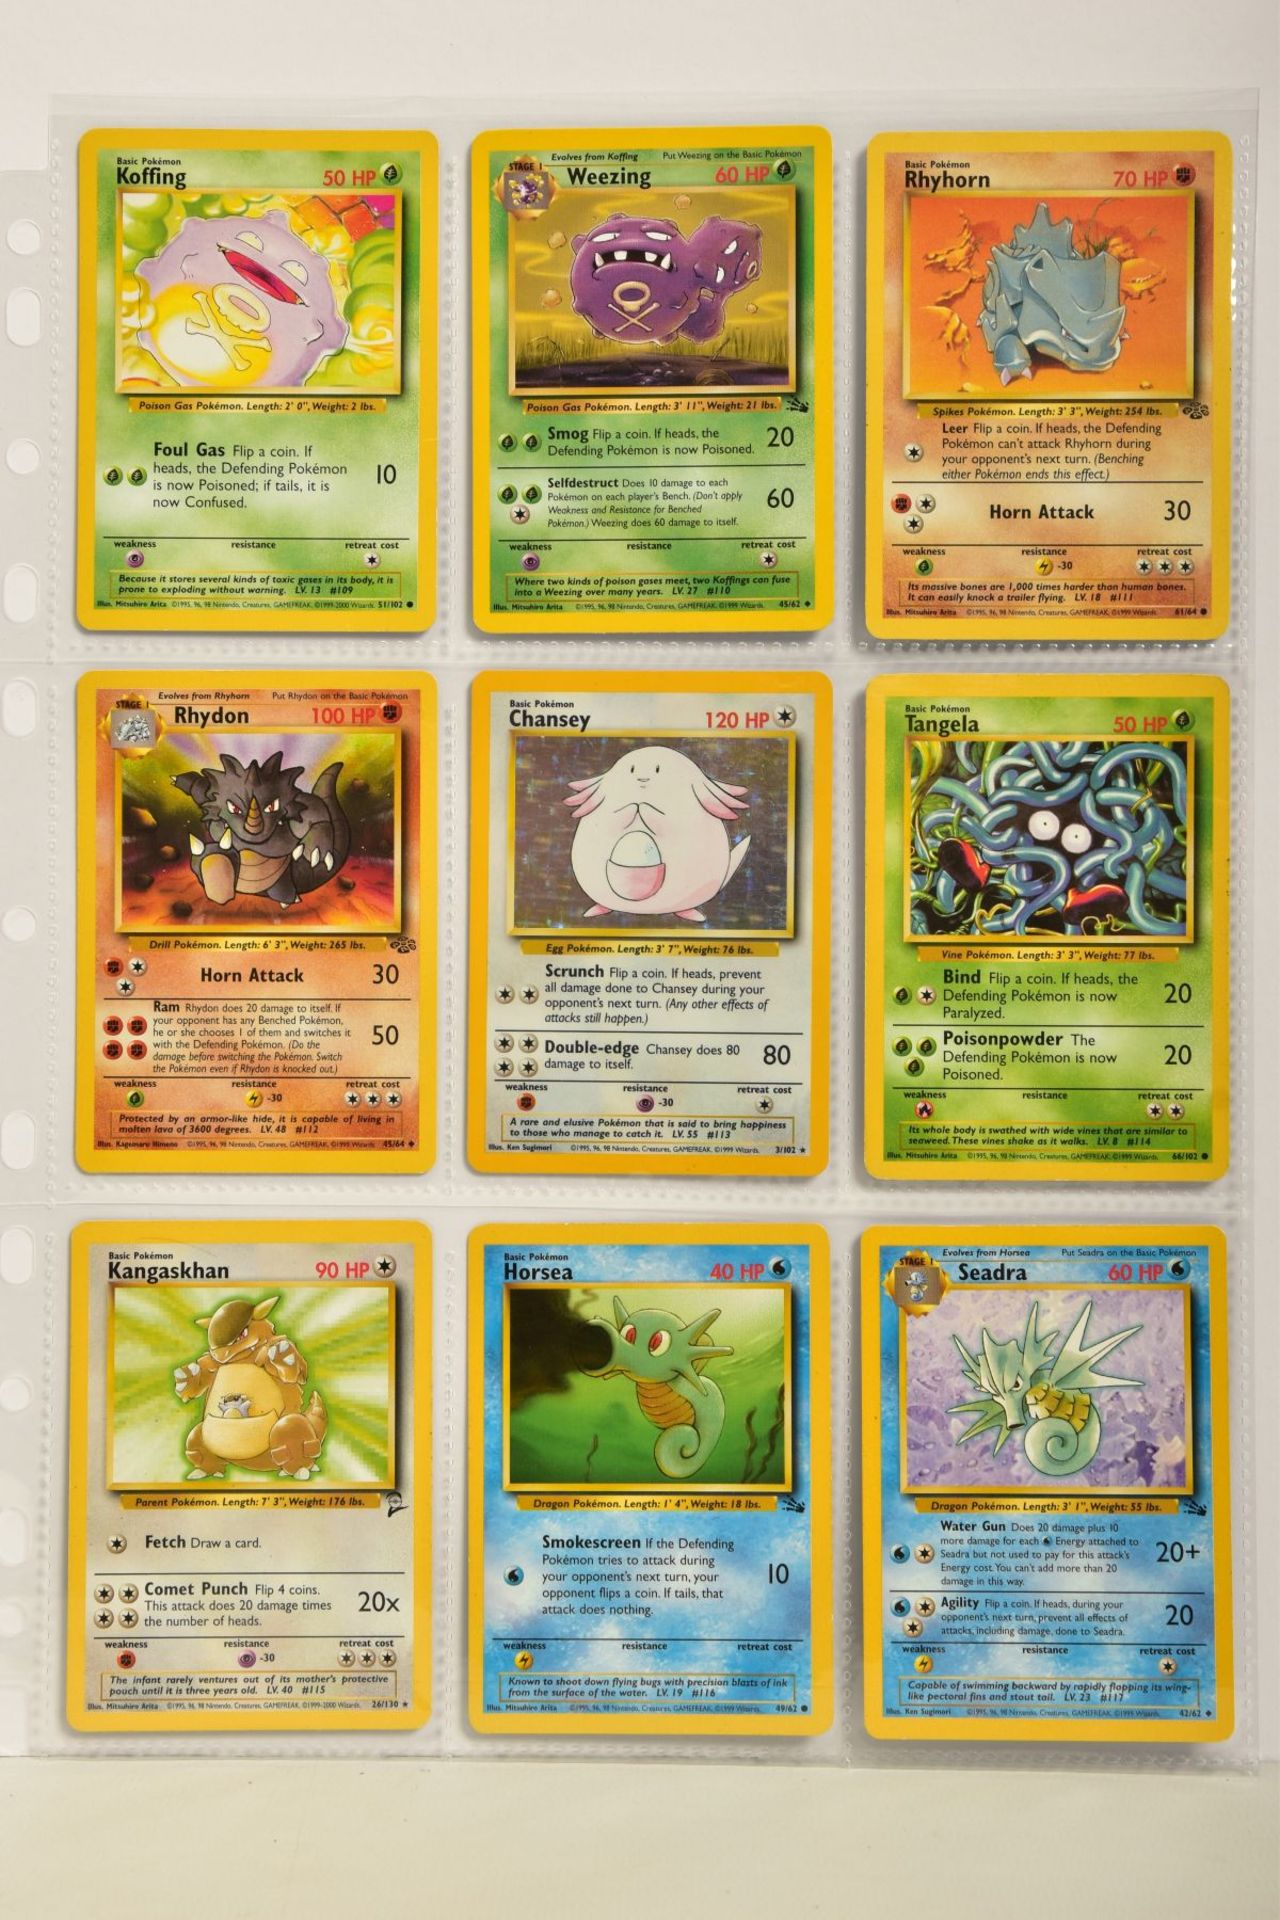 POKEMON THE TRADING CARD GAME 154 CARDS IN POKEMON TCG FOLDER, includes one of each of the - Image 14 of 20